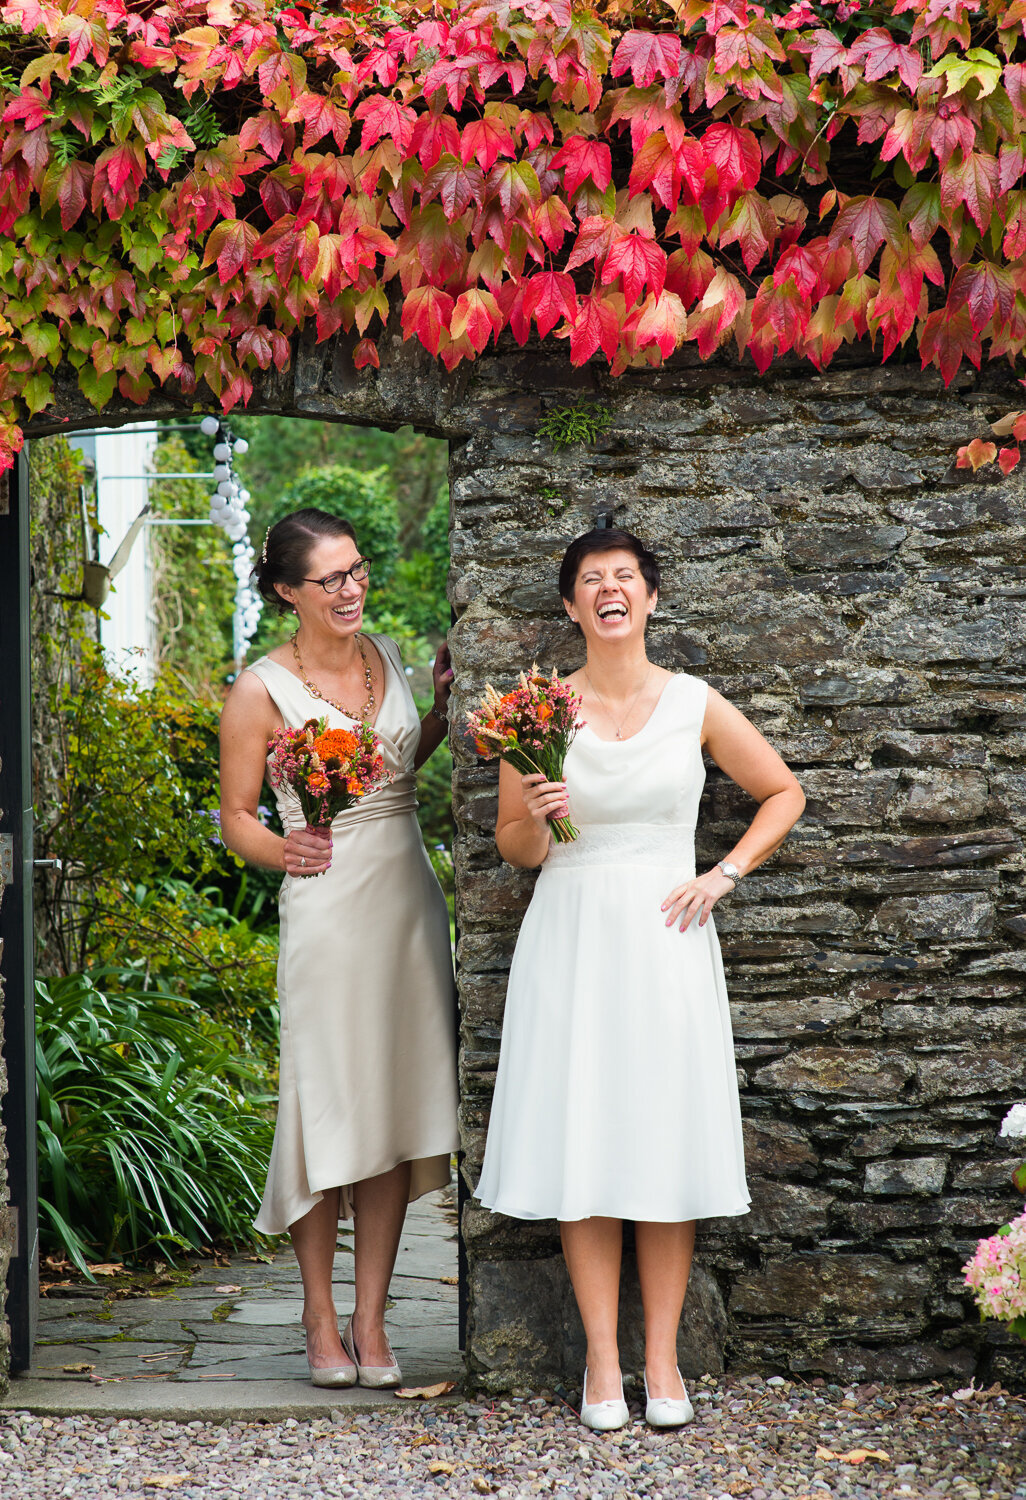 Gay brides holding orange flower bouquets, laughing underneath red and orange ivy leaf